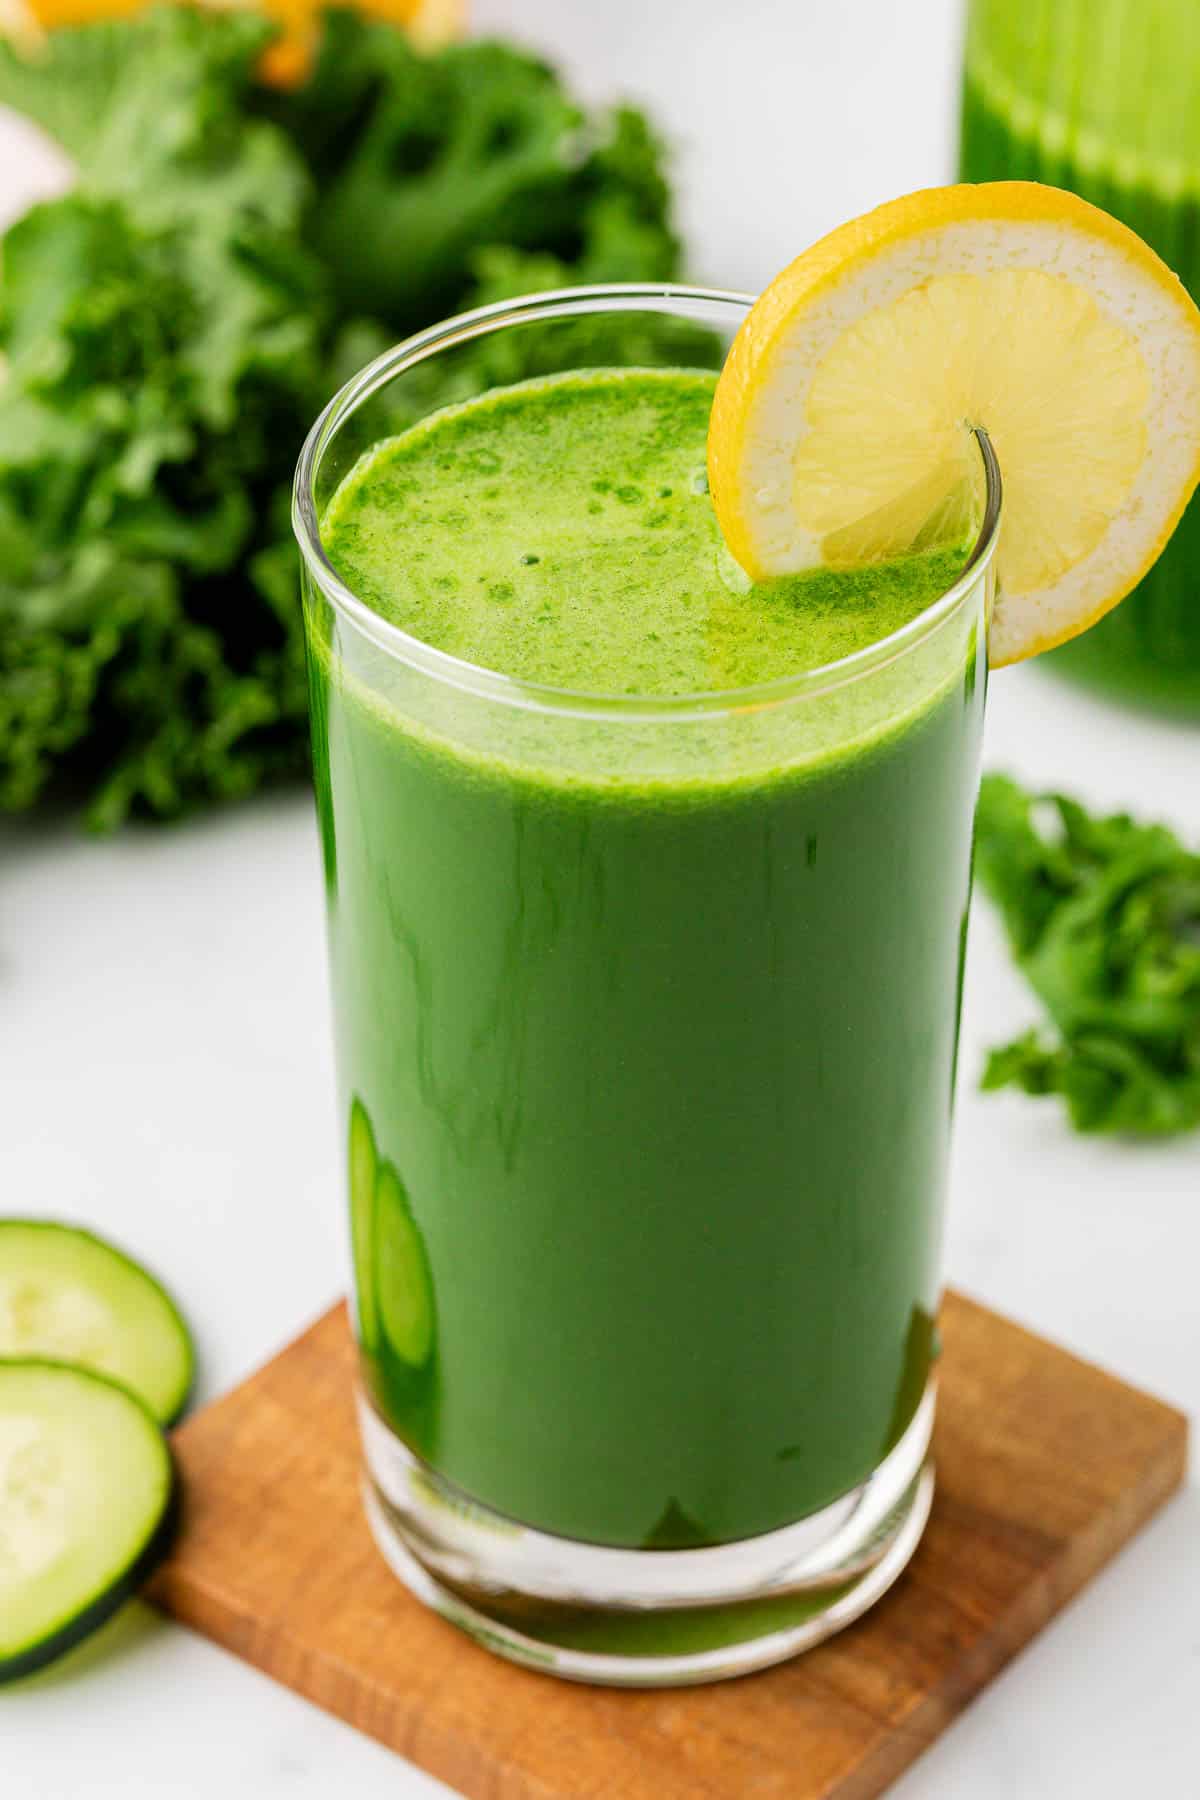 kale juice in a glass with a lemon slice on the rim